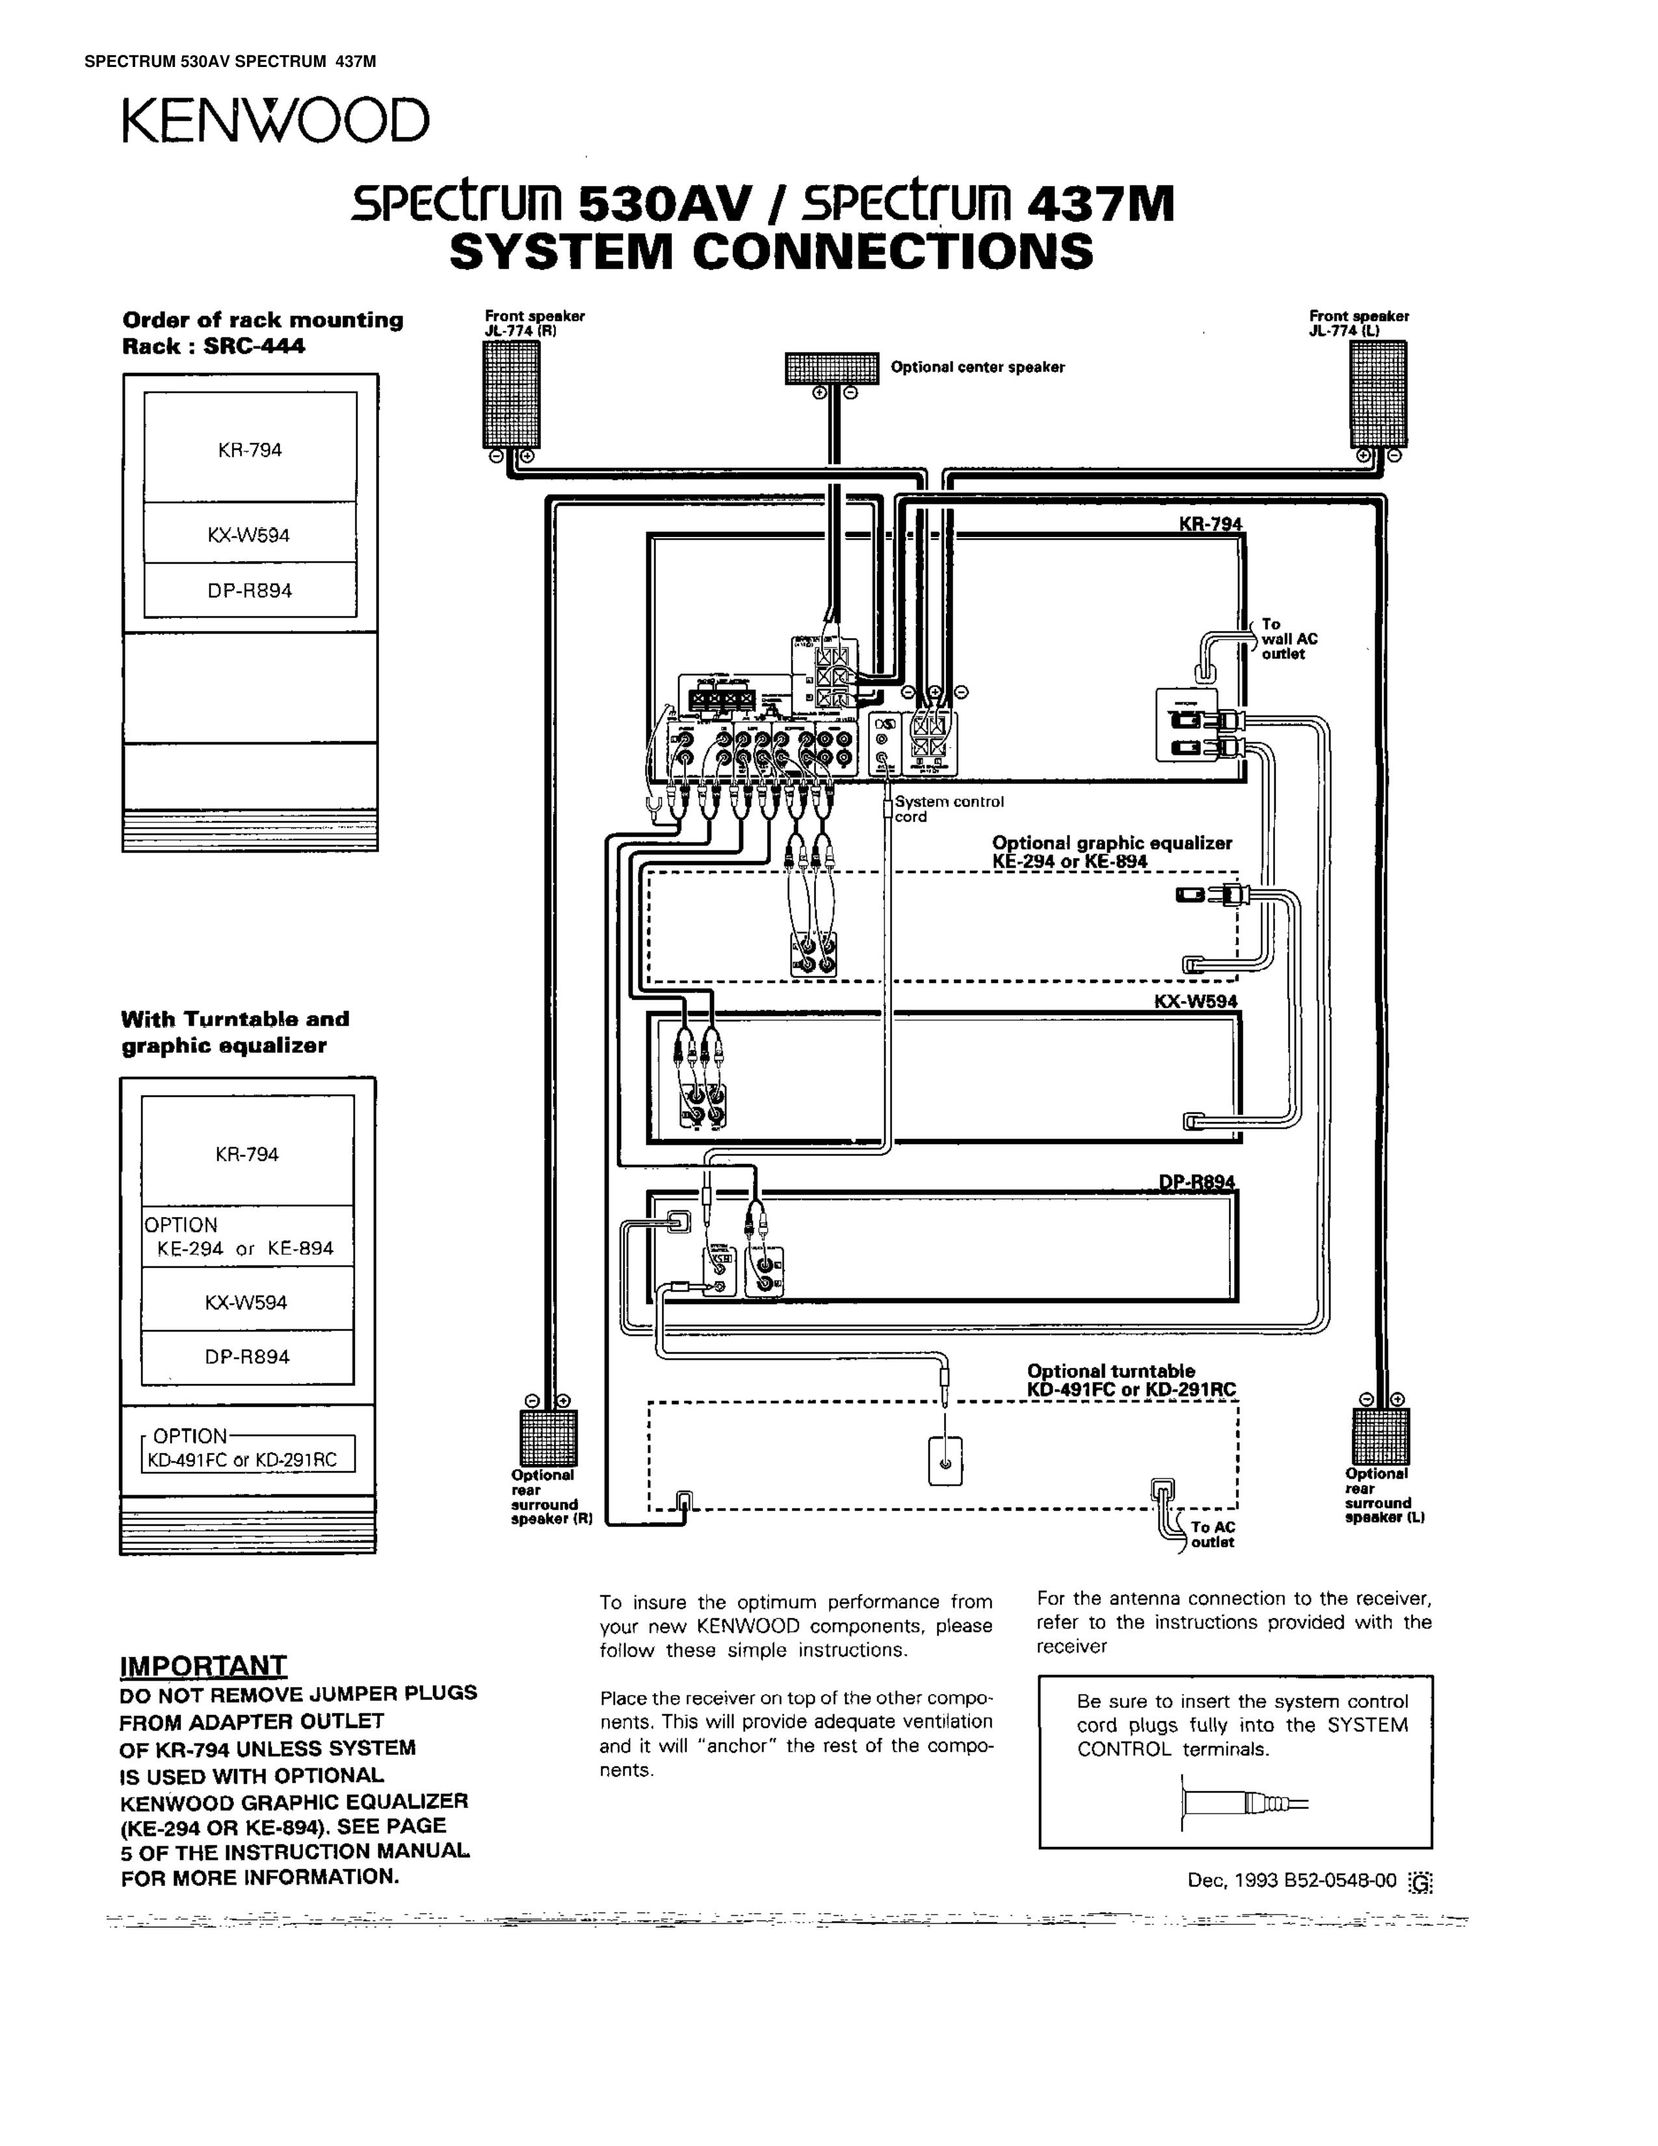 Kenwood 437M Stereo System User Manual